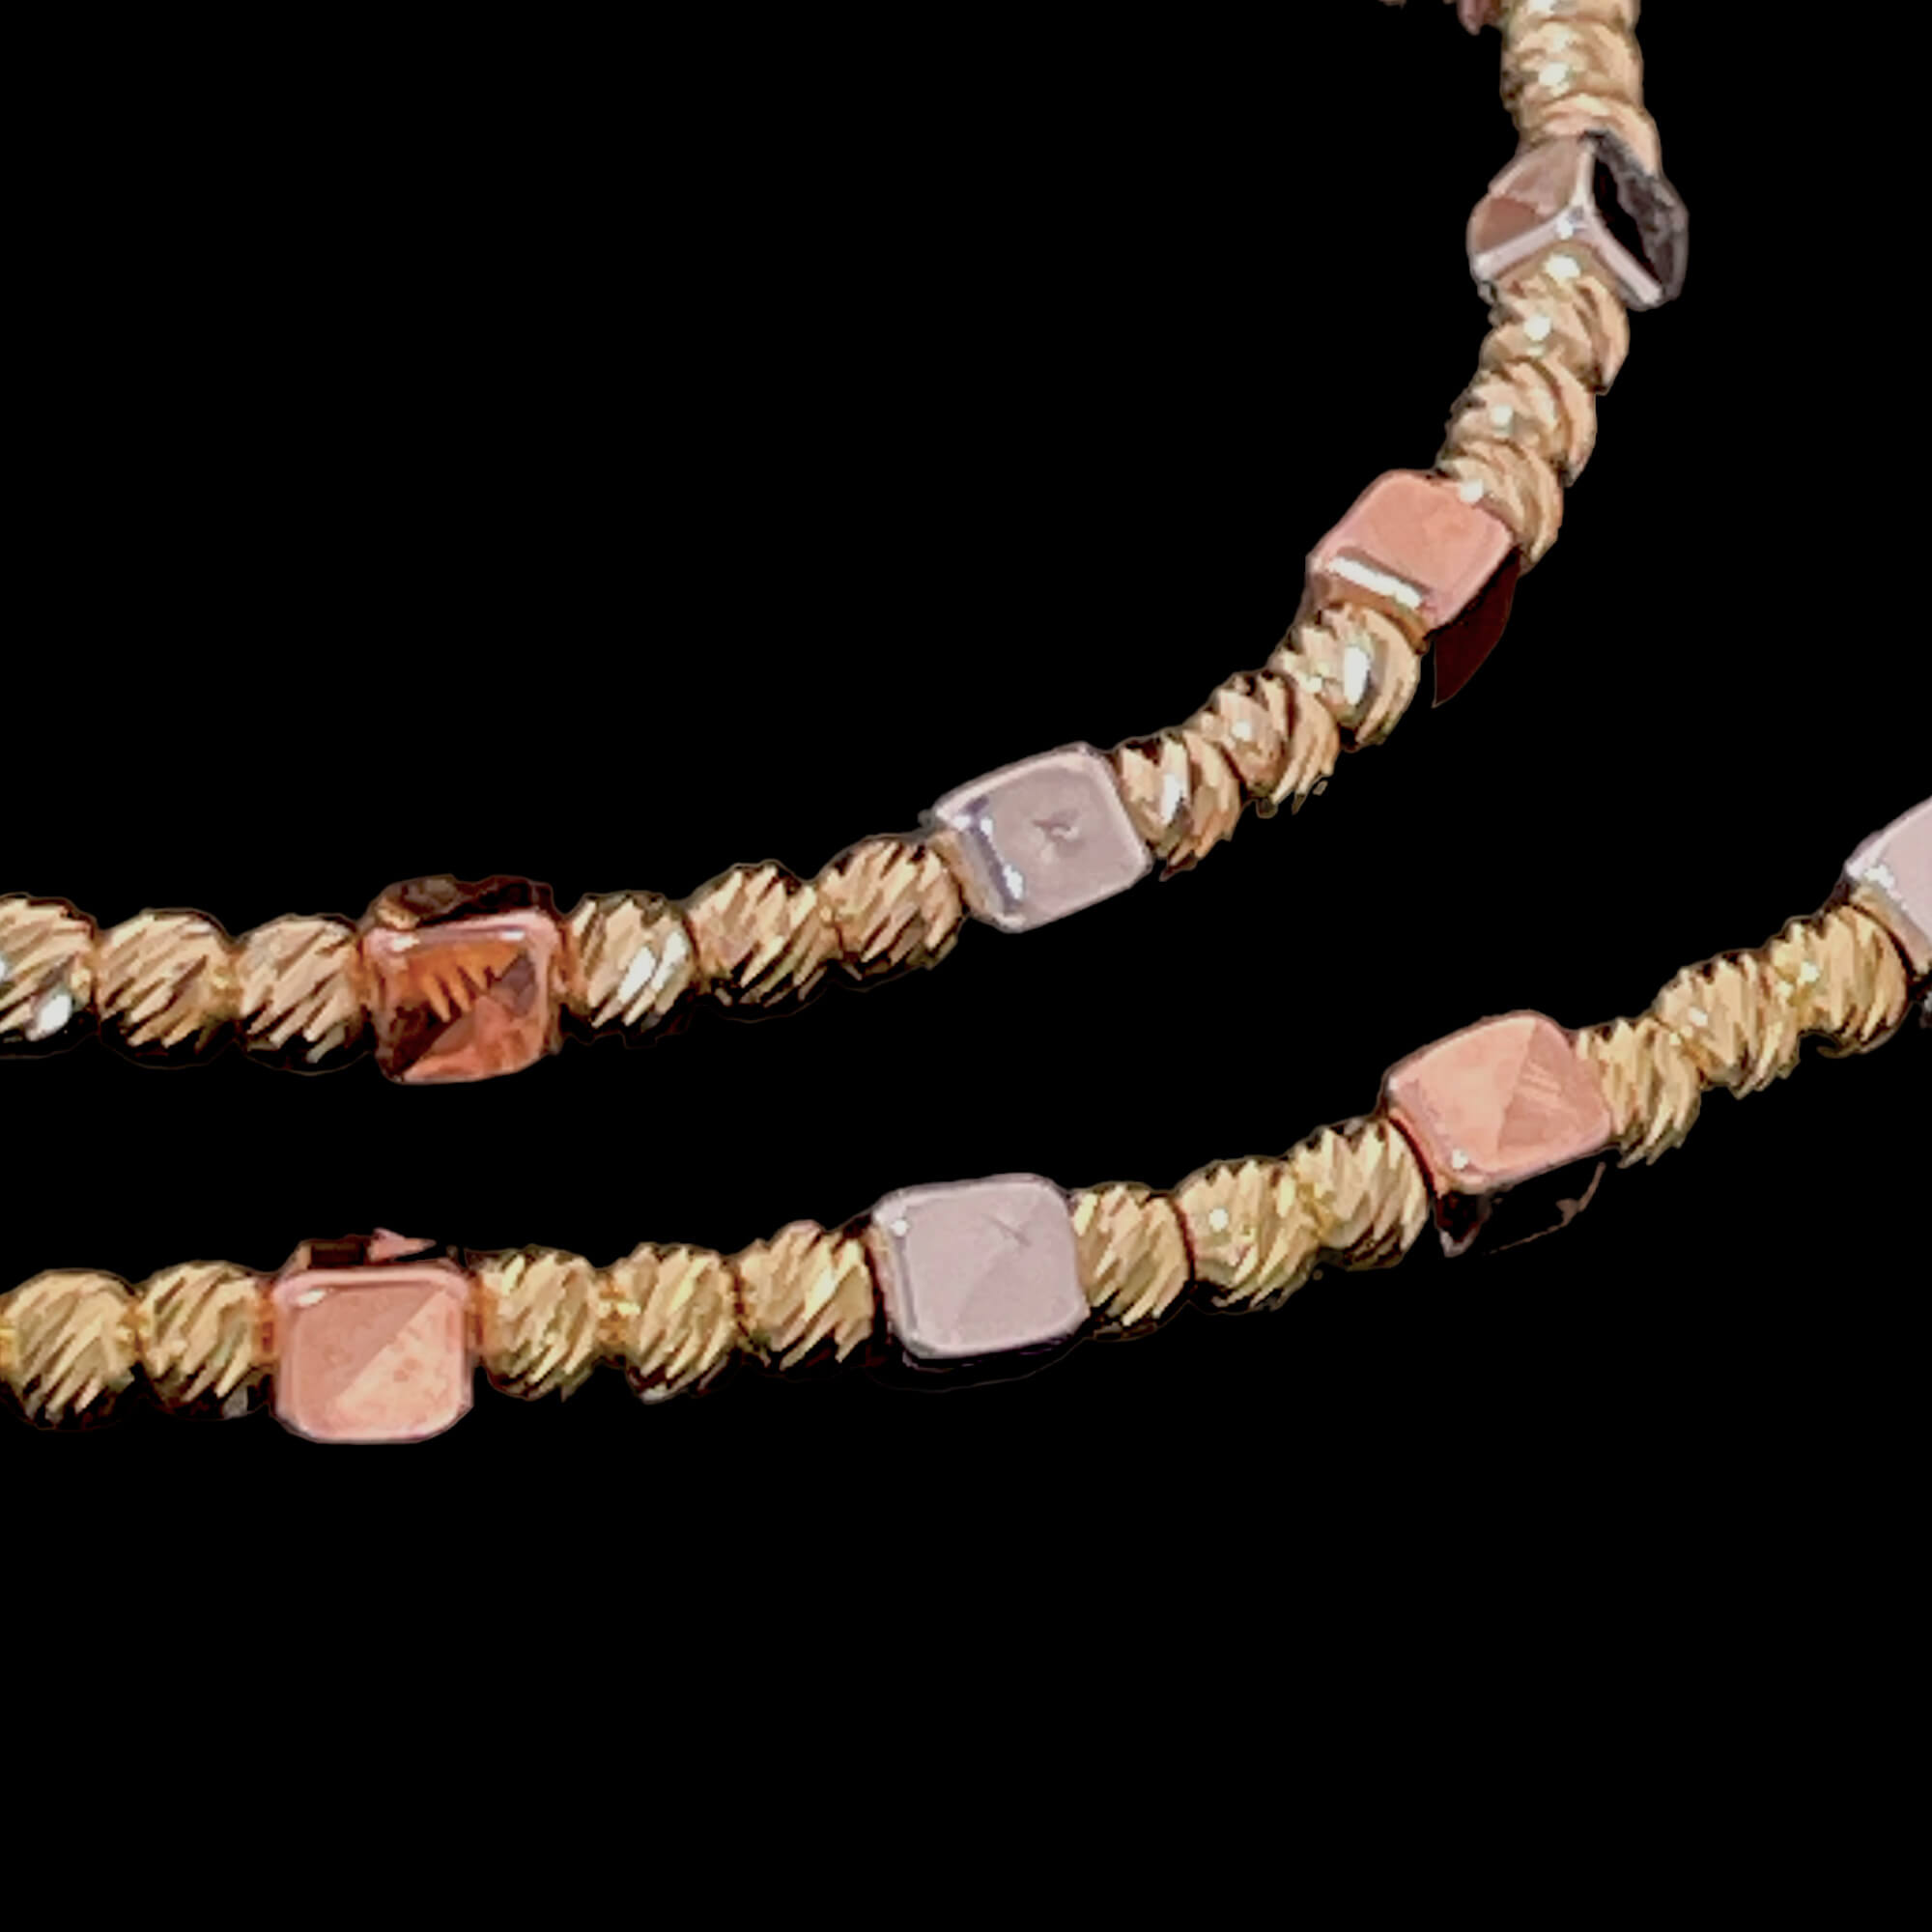 Three-colored chain, 3mm beads with processing